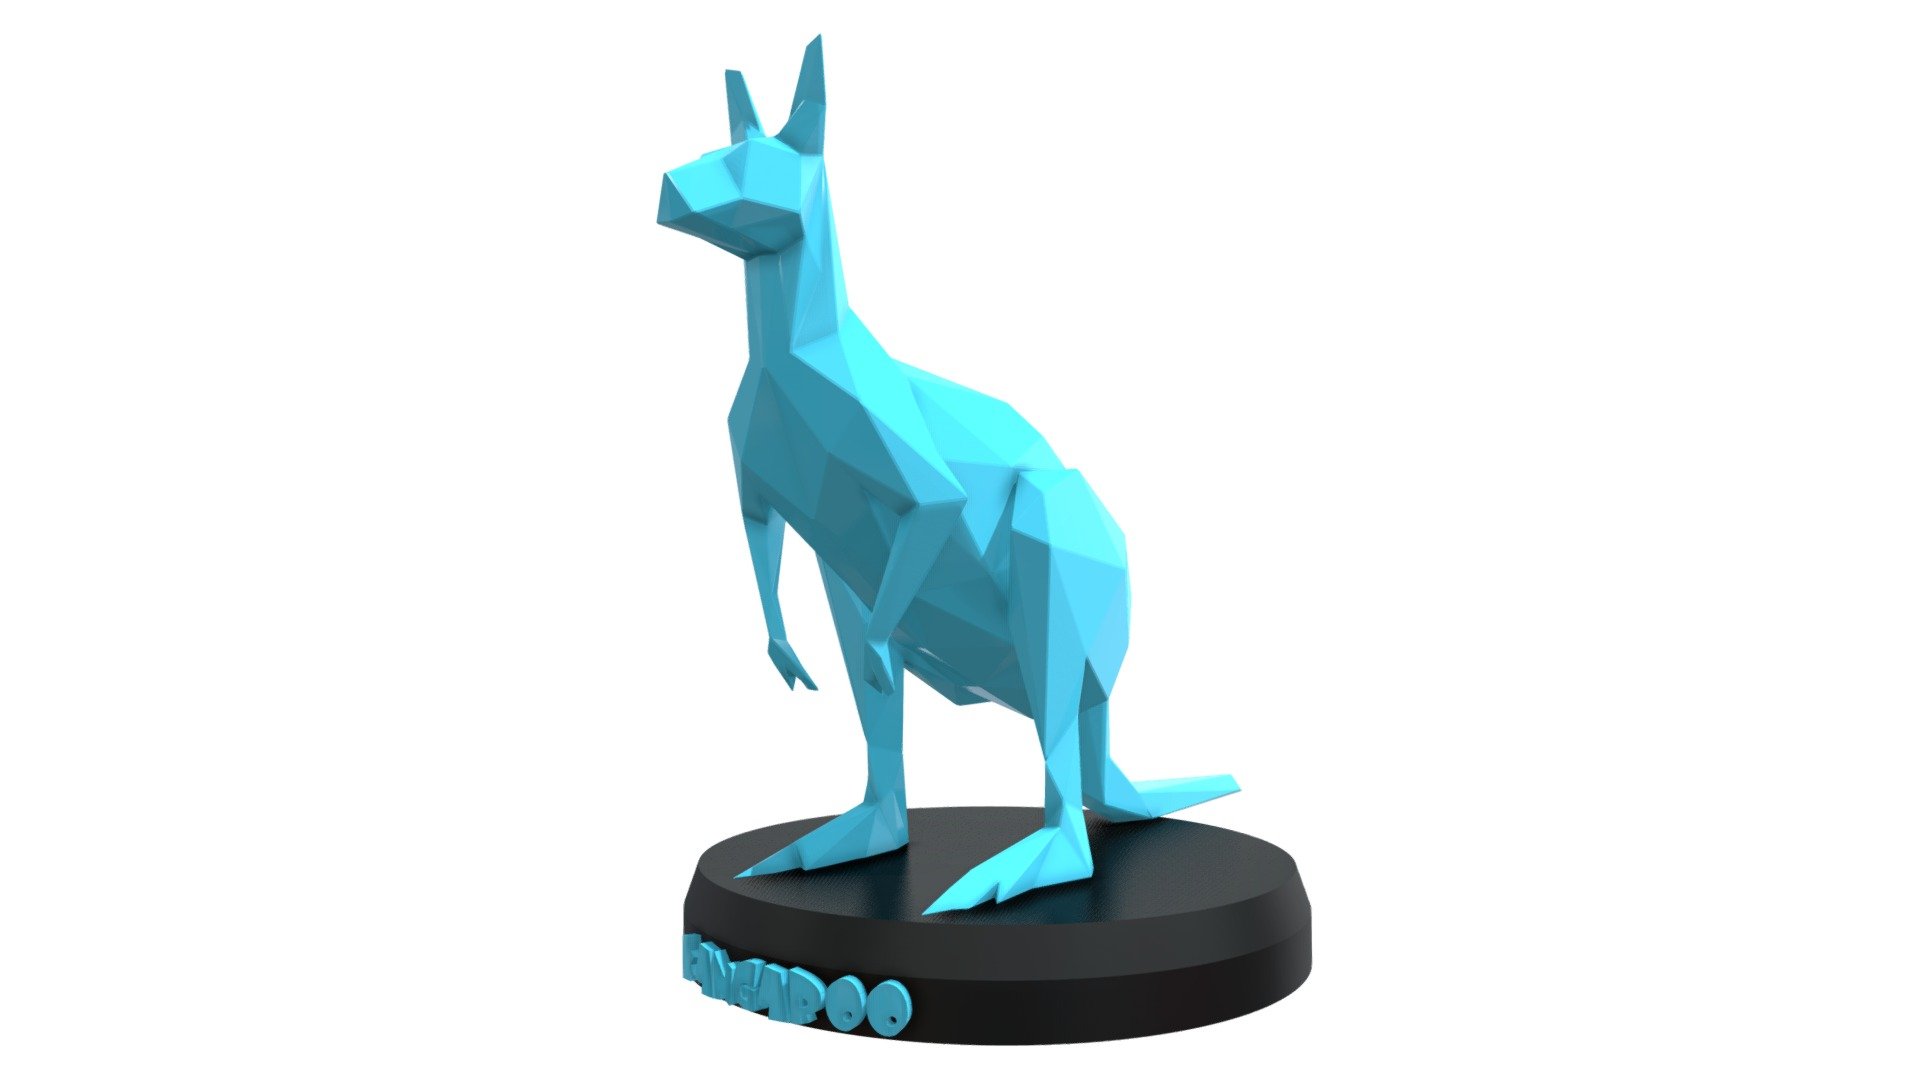 Polygonal 3D Model with Parametric modeling with gold material, make it recommend for :


Basic modeling 
Rigging 
sculpting 
Become Statue
Decorate
3D Print File
Toy

Have fun  :) - Poly Kangaroo - Buy Royalty Free 3D model by Puppy3D 3d model